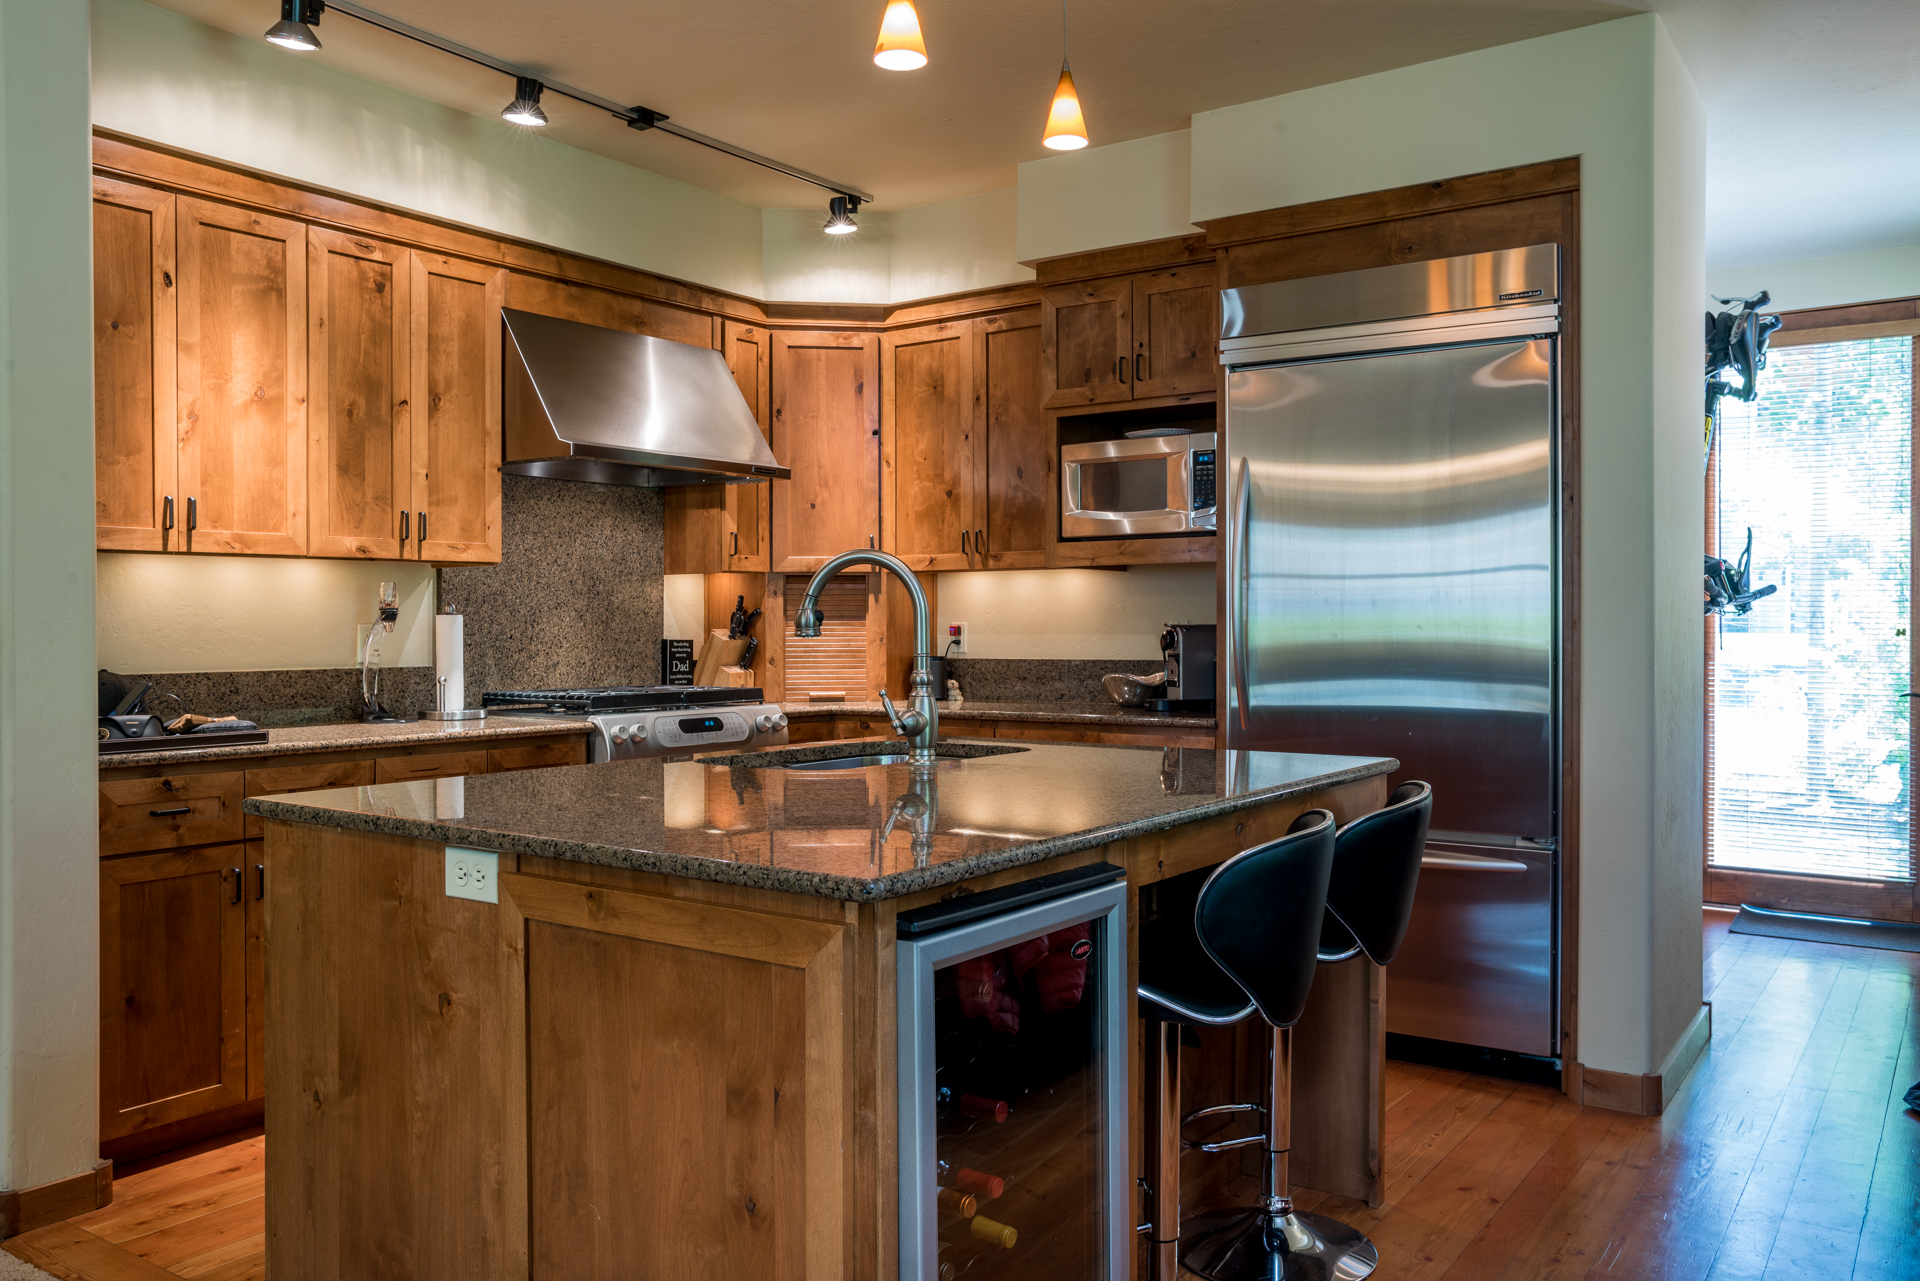 This featured listing has a gourmet kitchen. 